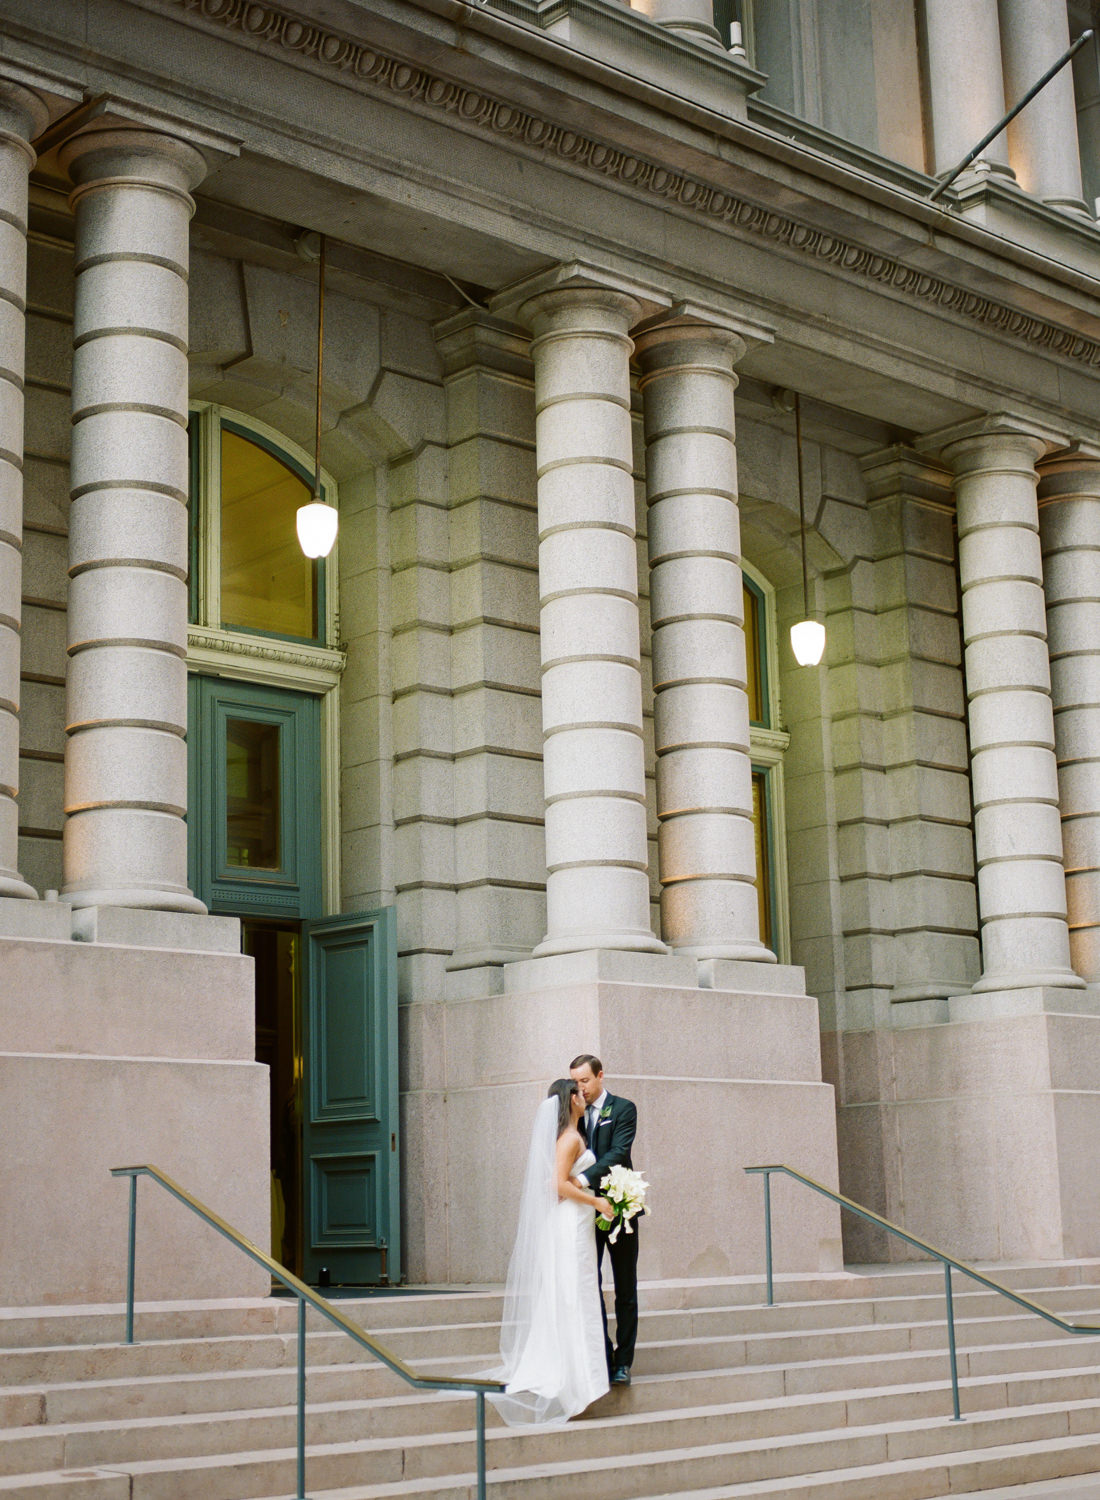 Bride and Groom Portrait at St. Louis Old Post Office and Custom House; St. Louis fine art film wedding photographer Erica Robnett Photography